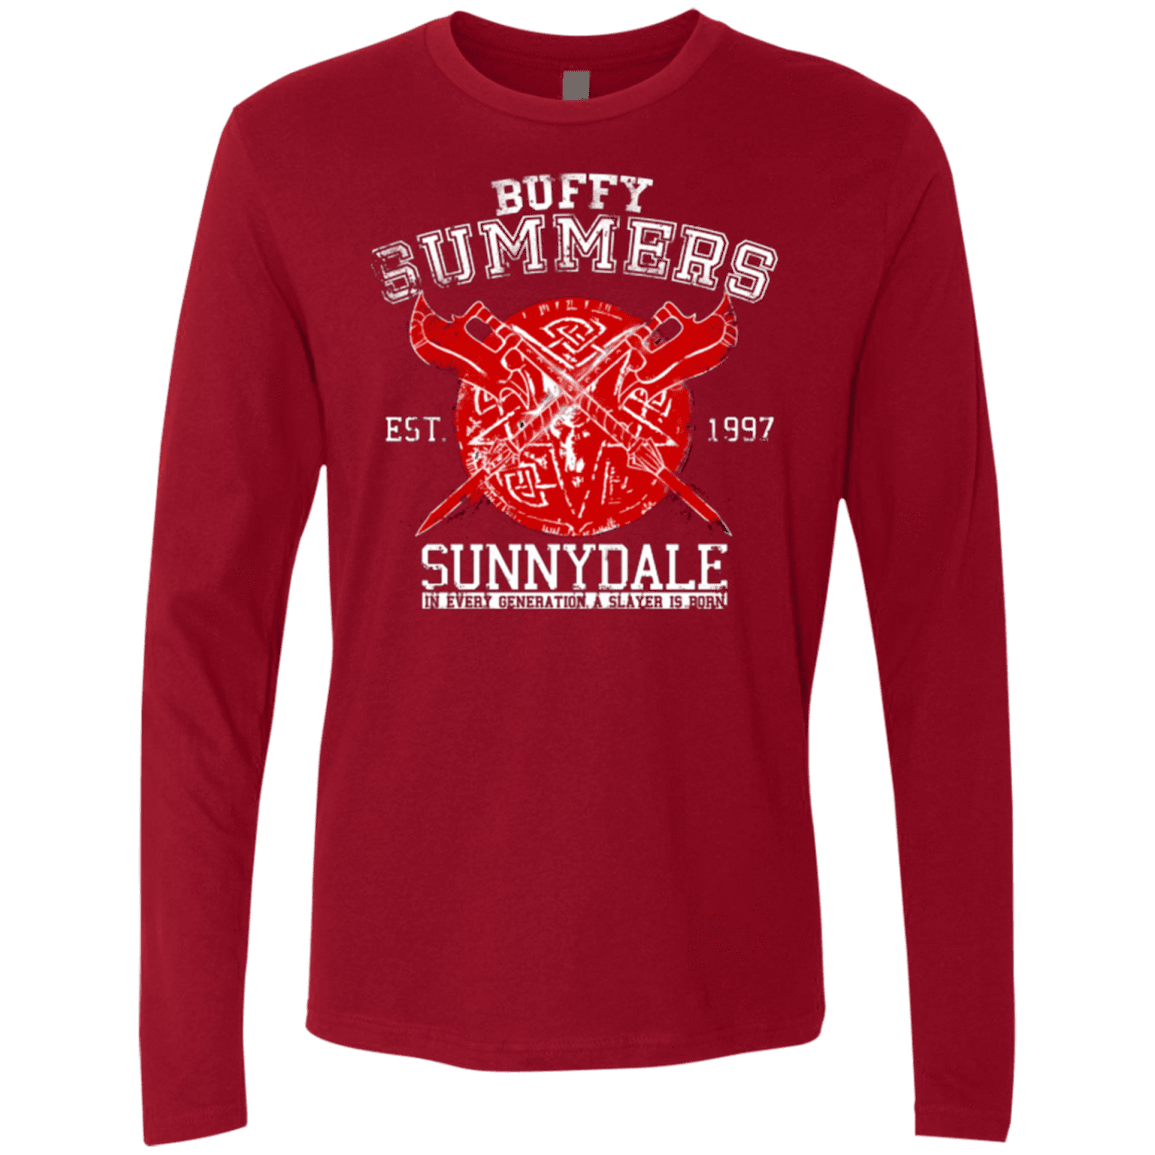 T-Shirts Cardinal / Small 1 in Every Generation Men's Premium Long Sleeve